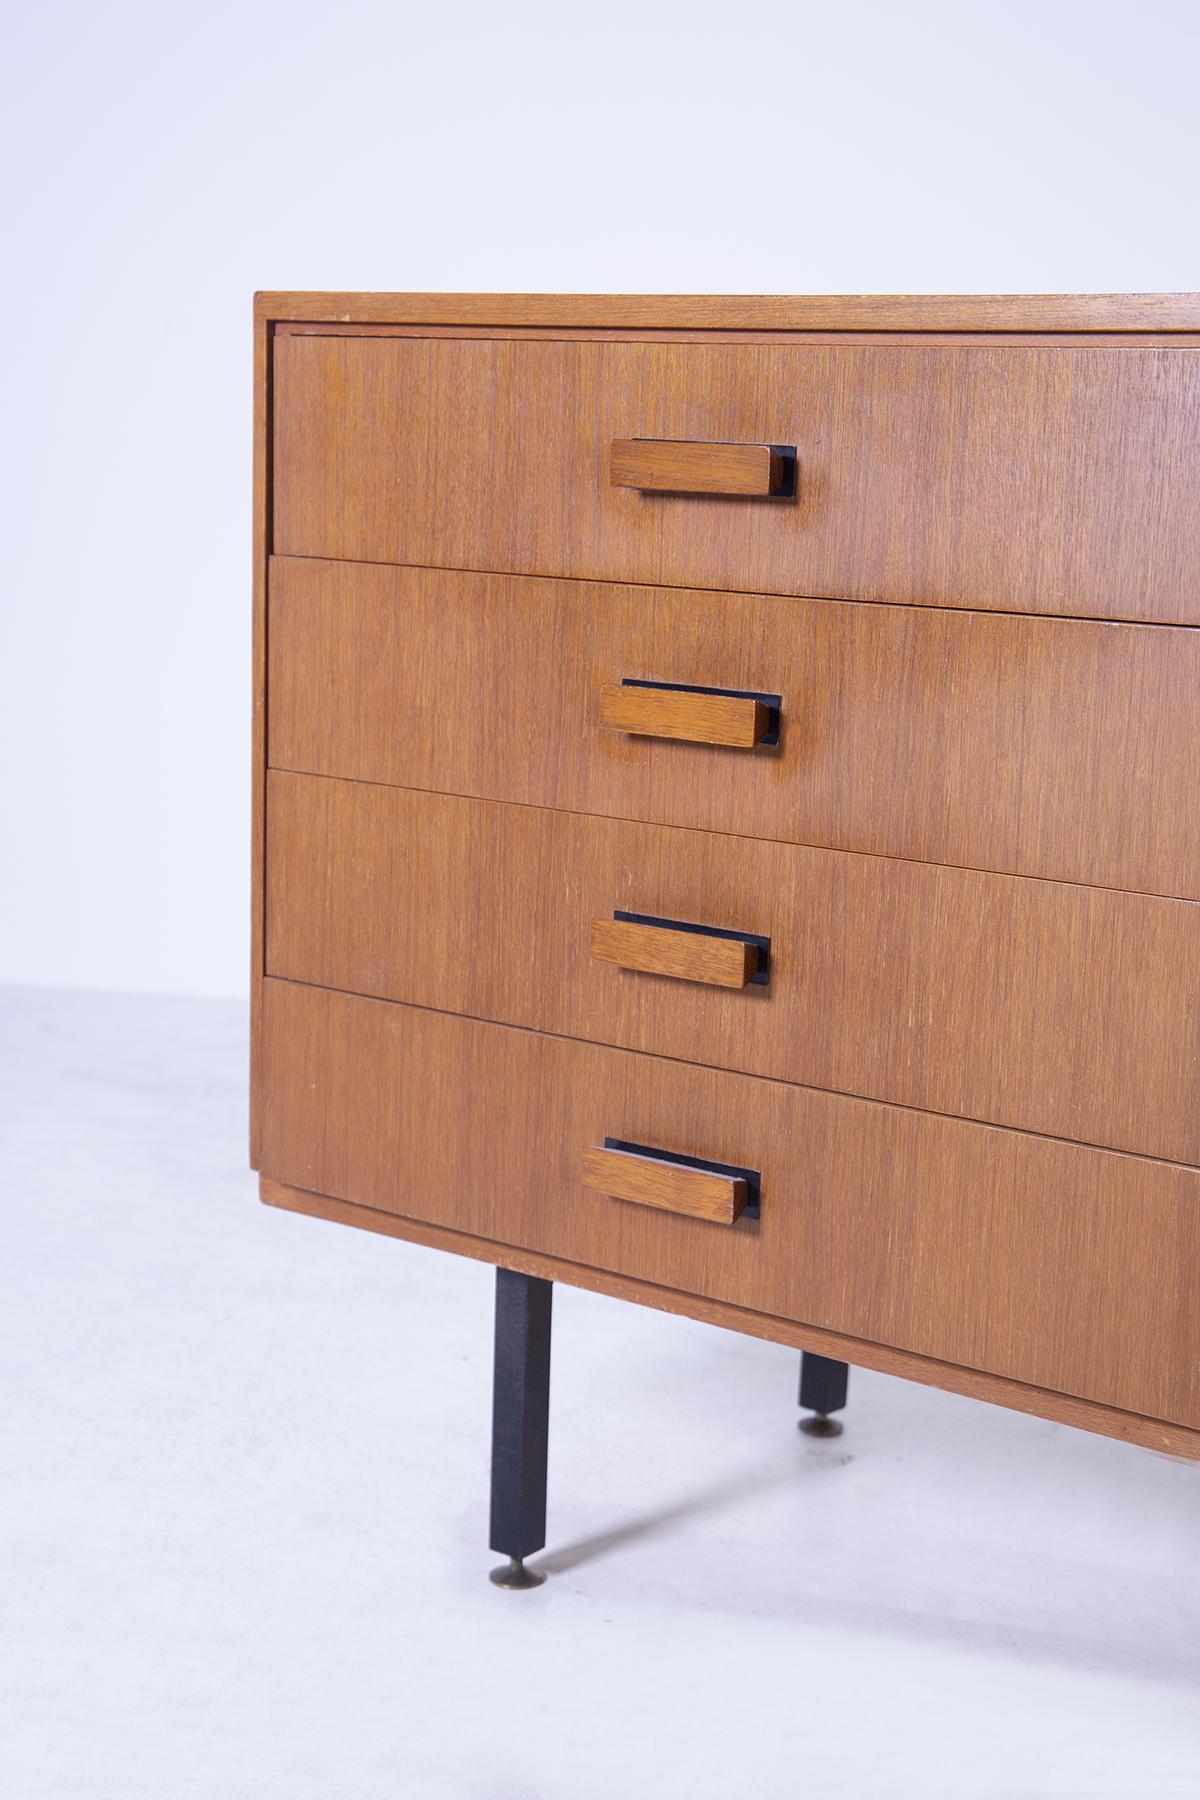 Vintage Italian chest of drawers from the 1950s. The chest of drawers is made of walnut wood with 6 drawers that can be pulled out via a geometric wooden handle. Its feet made of iron in a rectangular shape create and make the chest of drawers